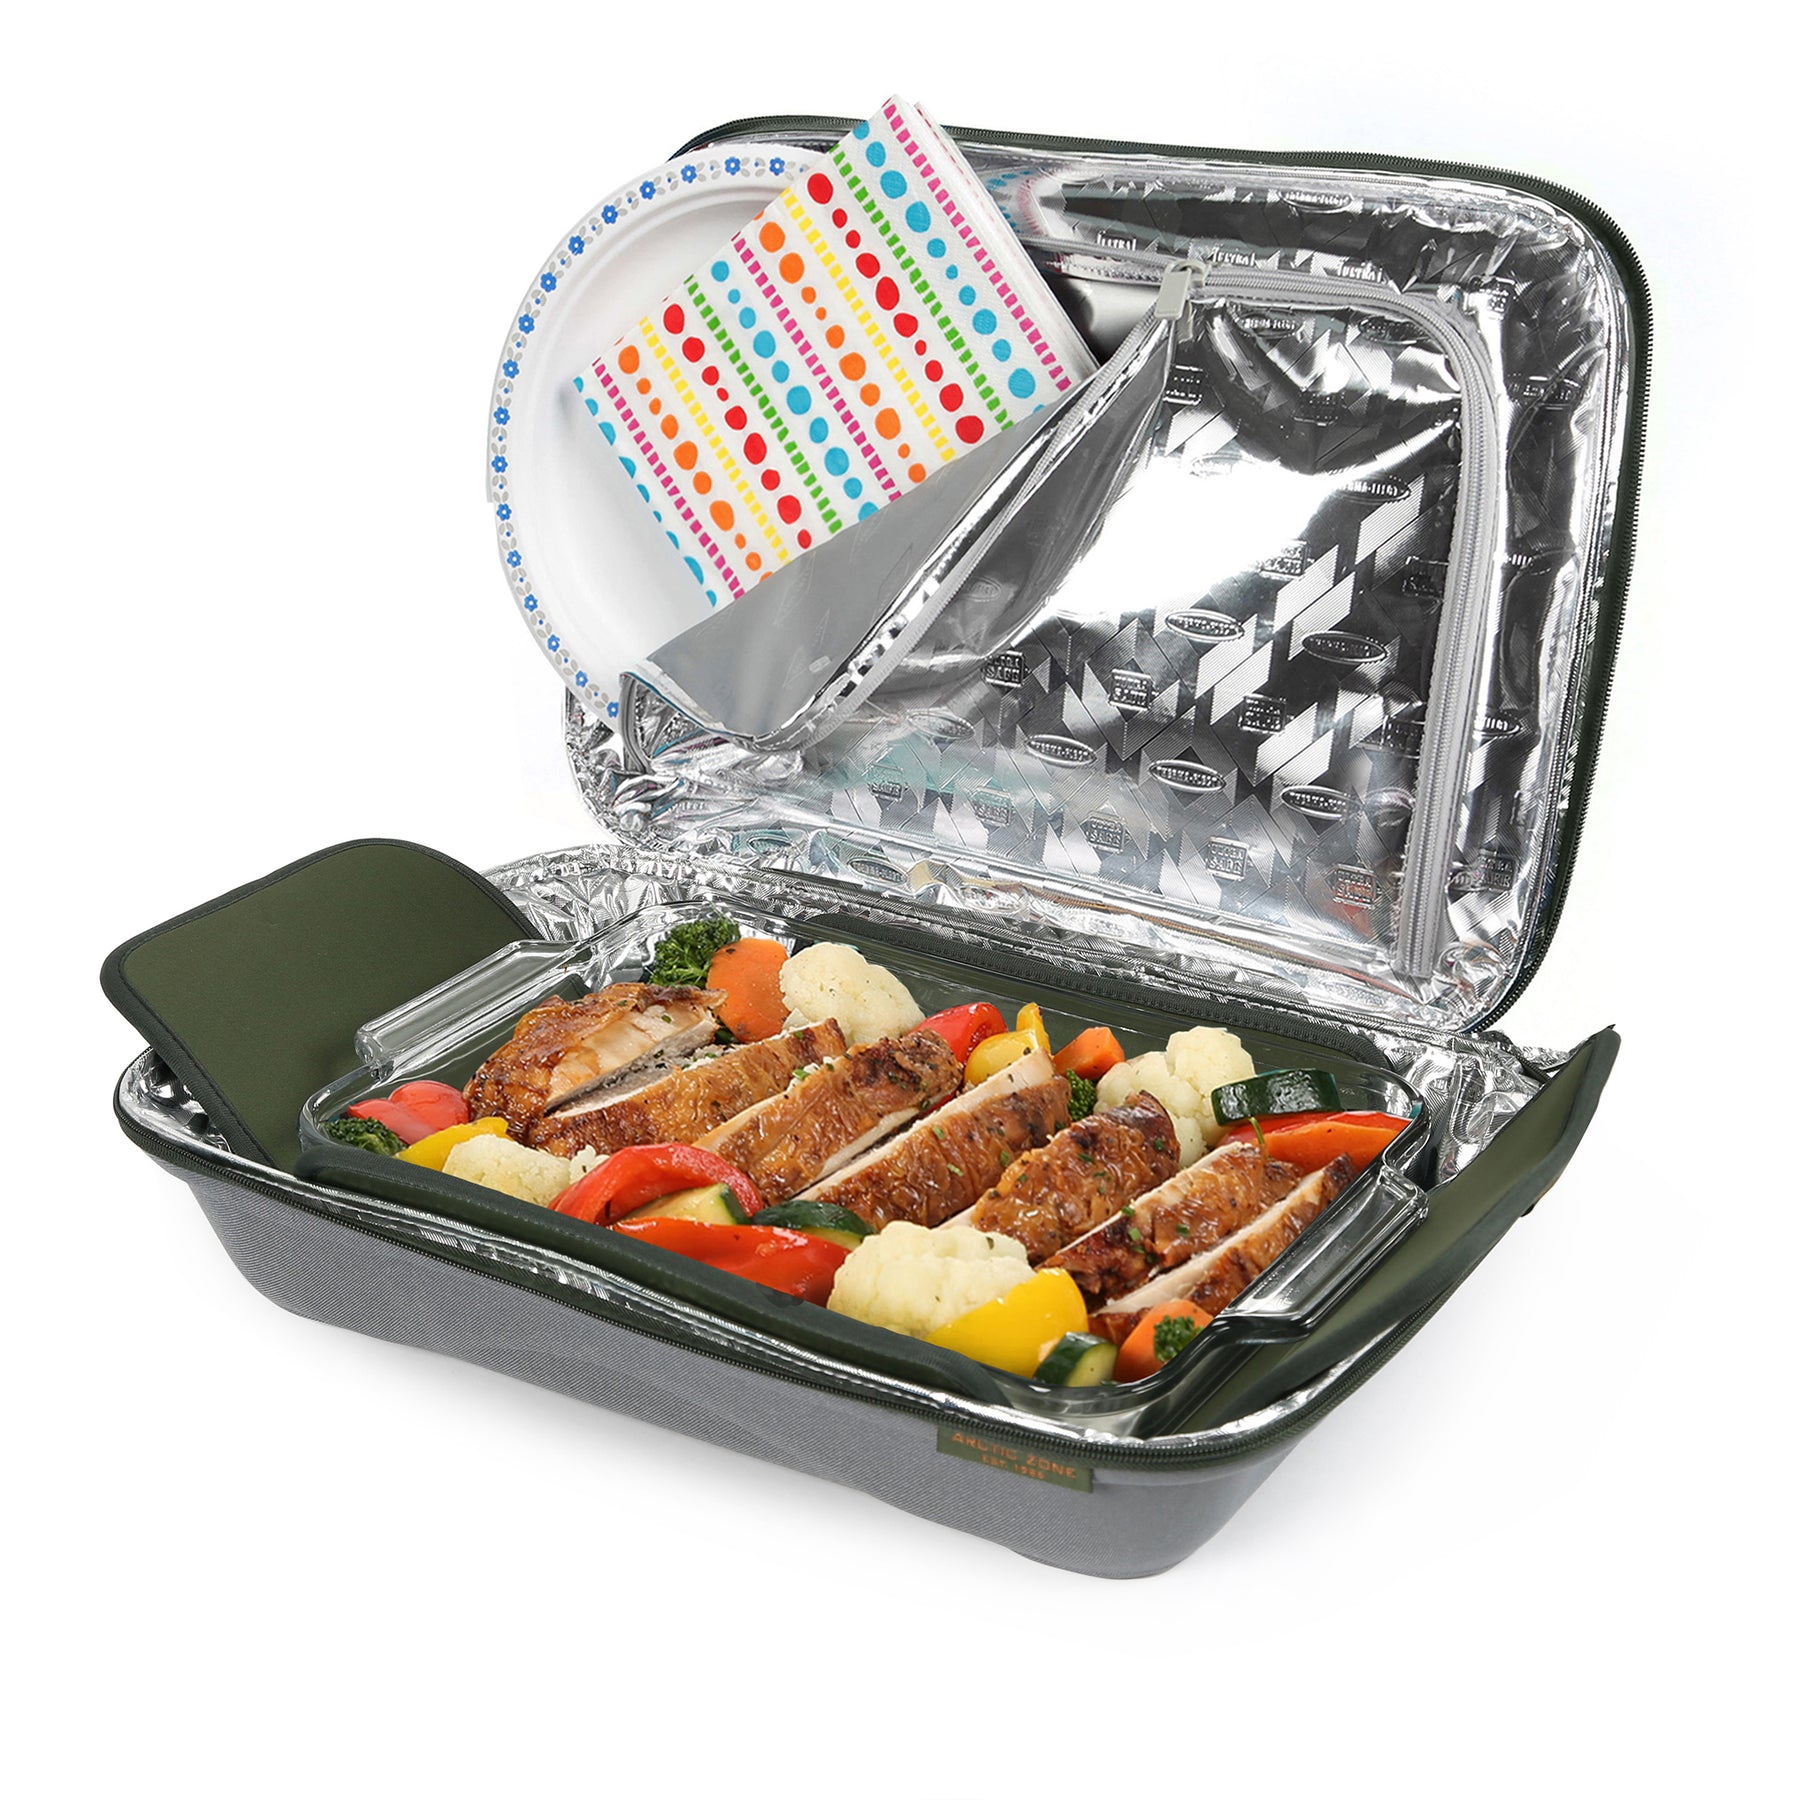 Food Pro Deluxe Thermal Carrier